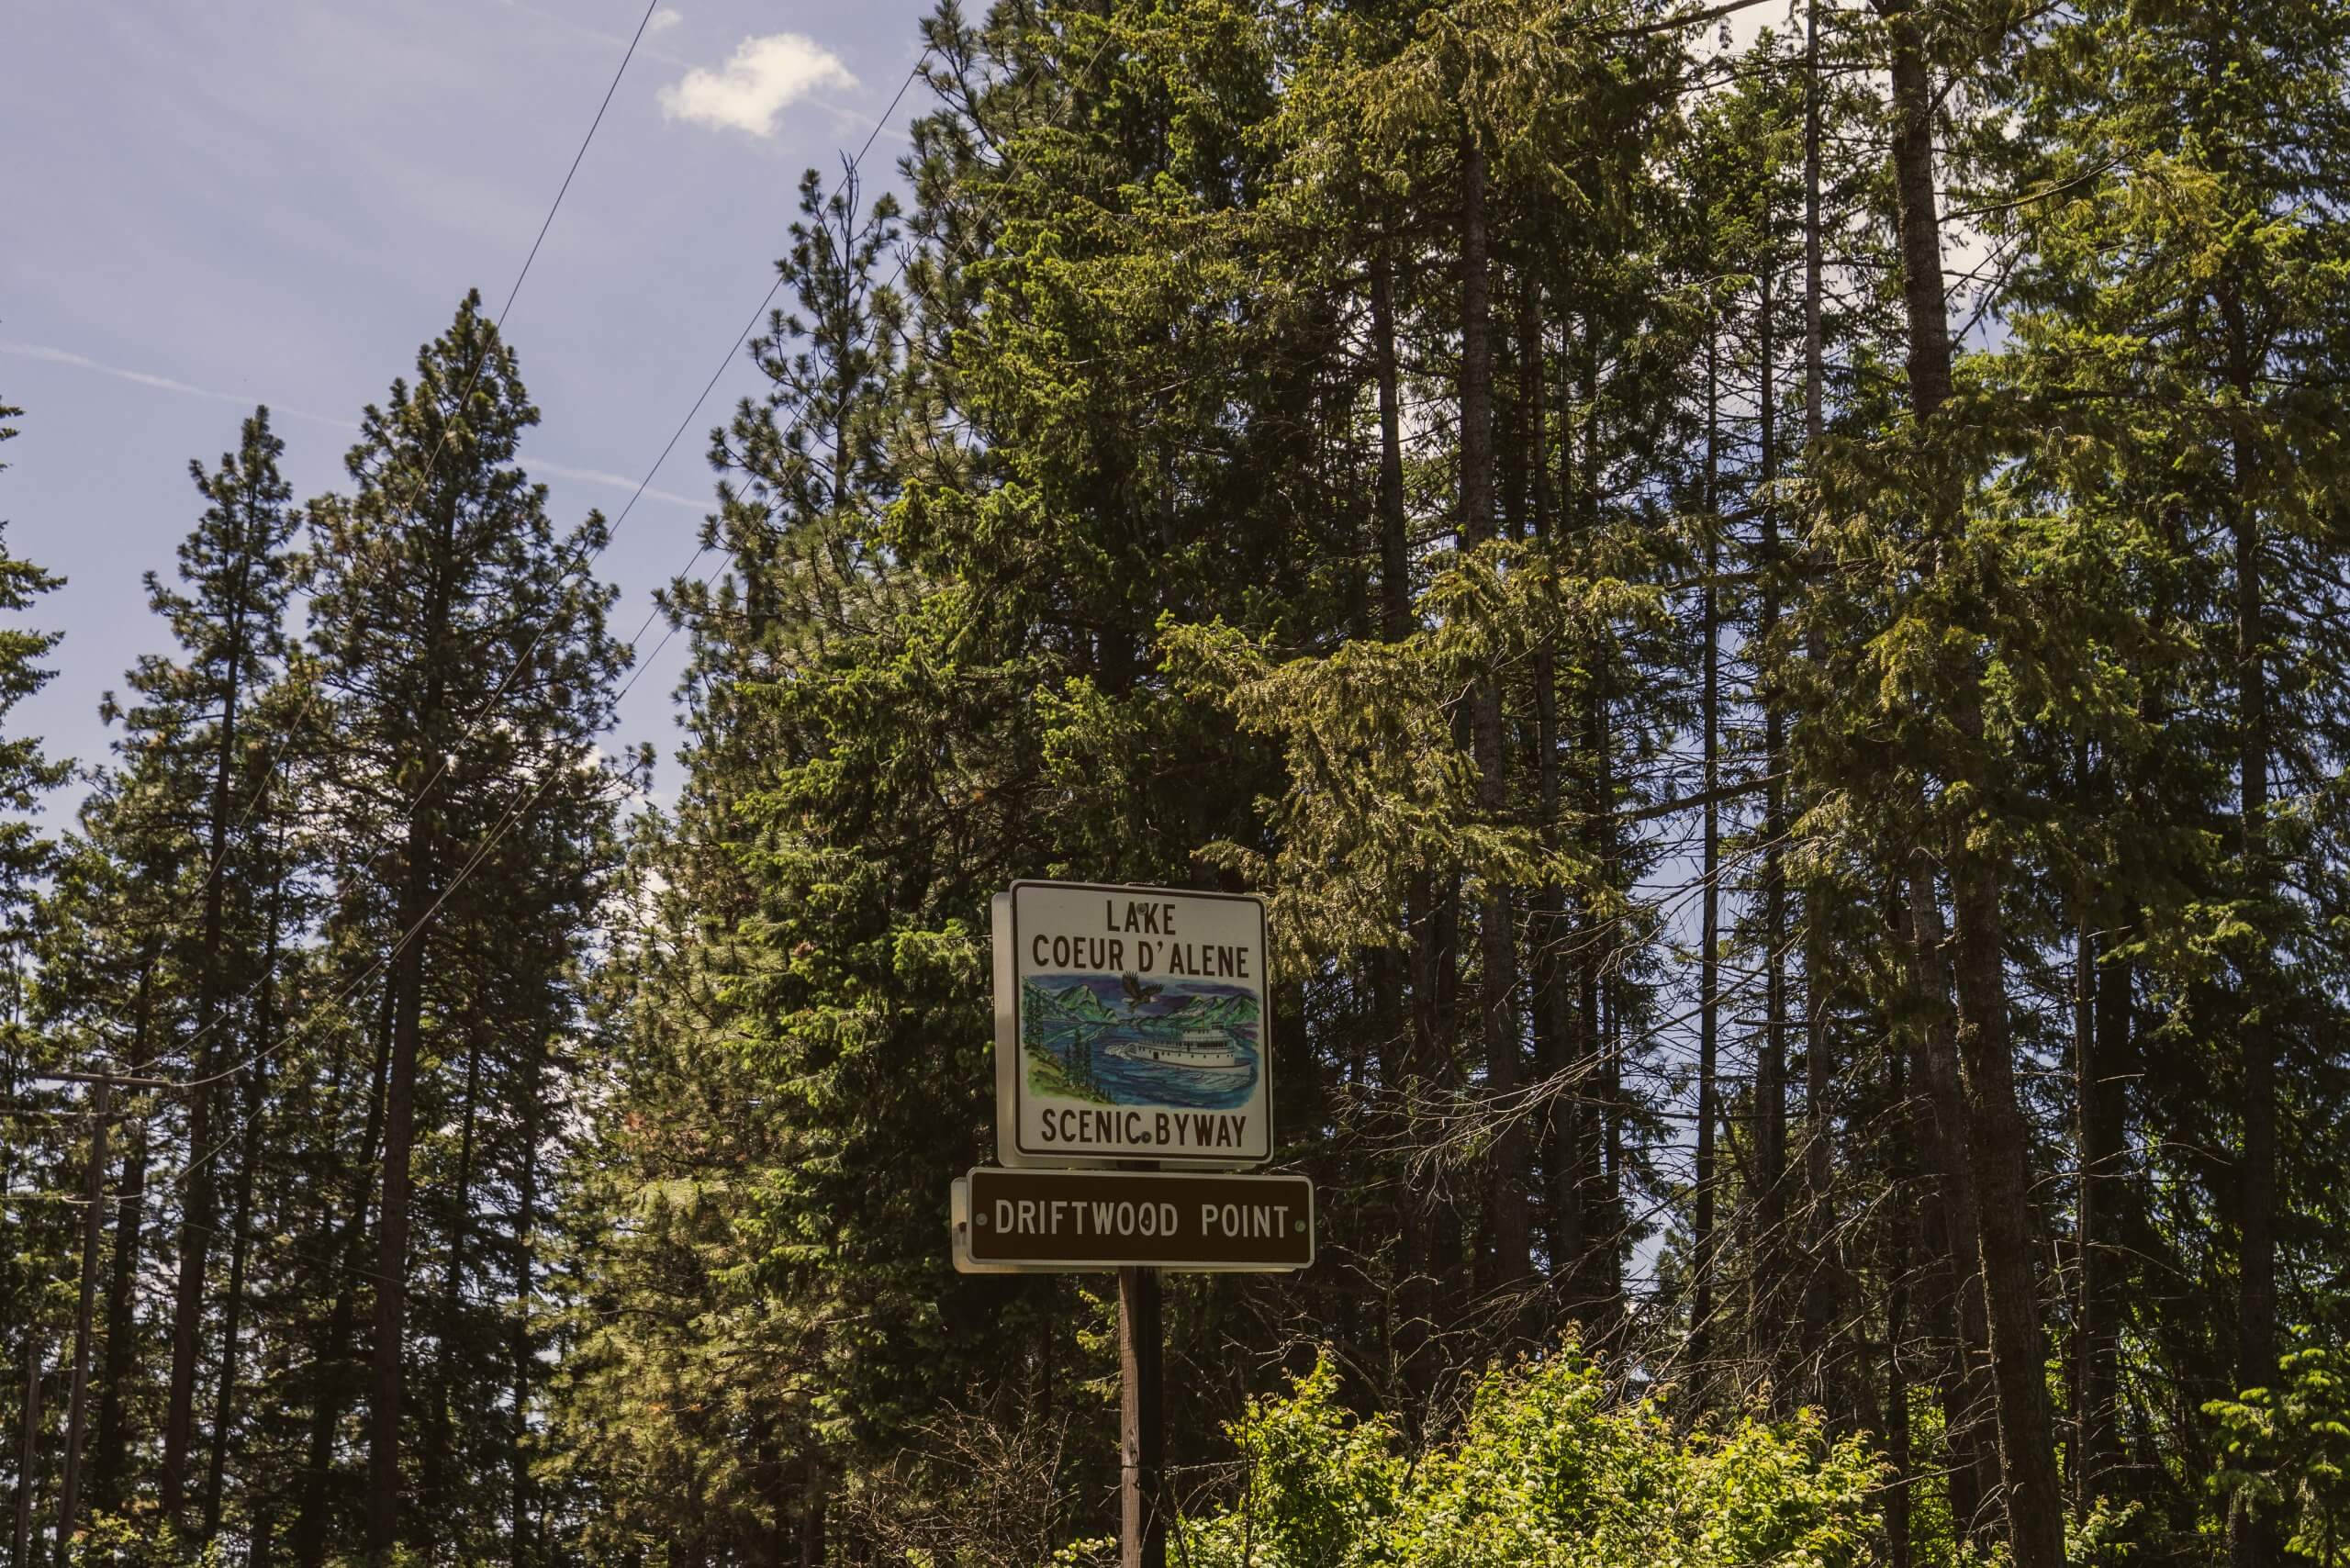 Lake Coeur d'Alene Scenic Byway signage.